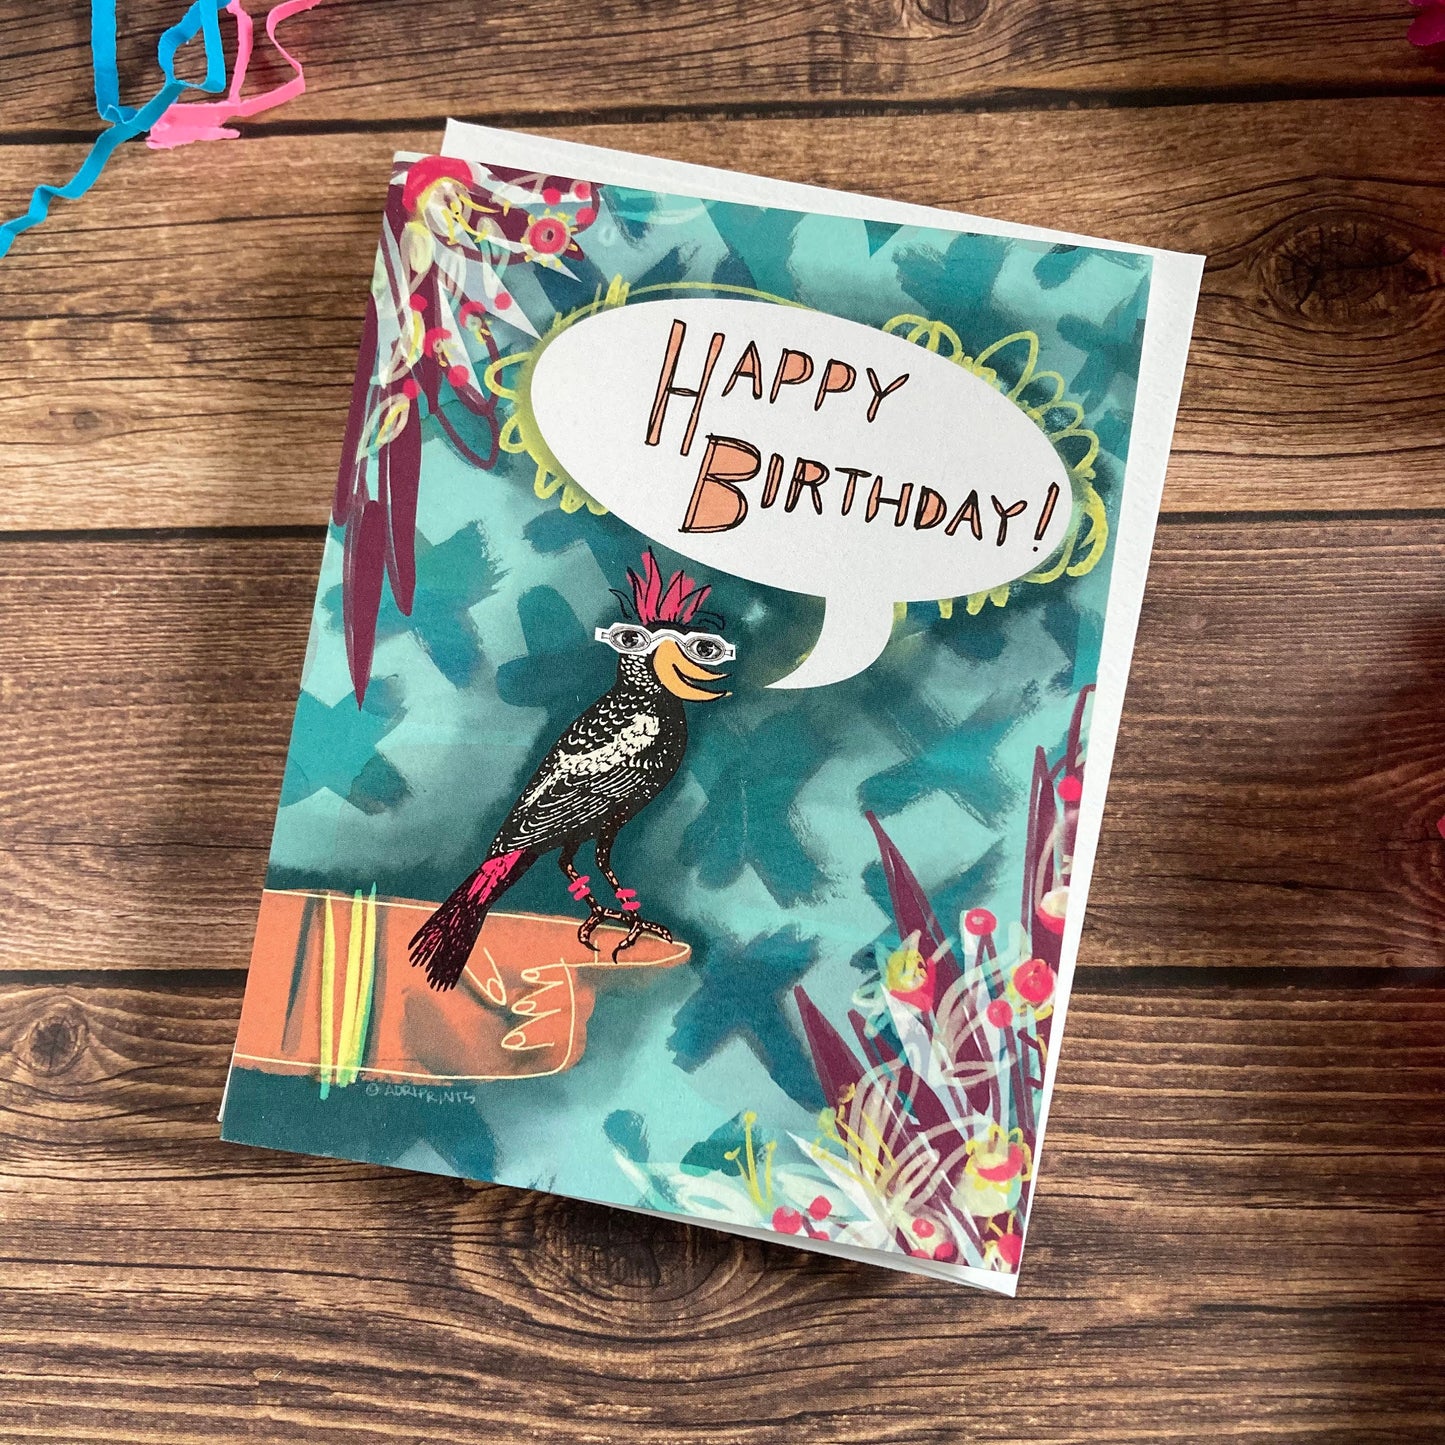 BIRTHDAY - Raven Collage card - featuring collage art by Adriana Bergstrom